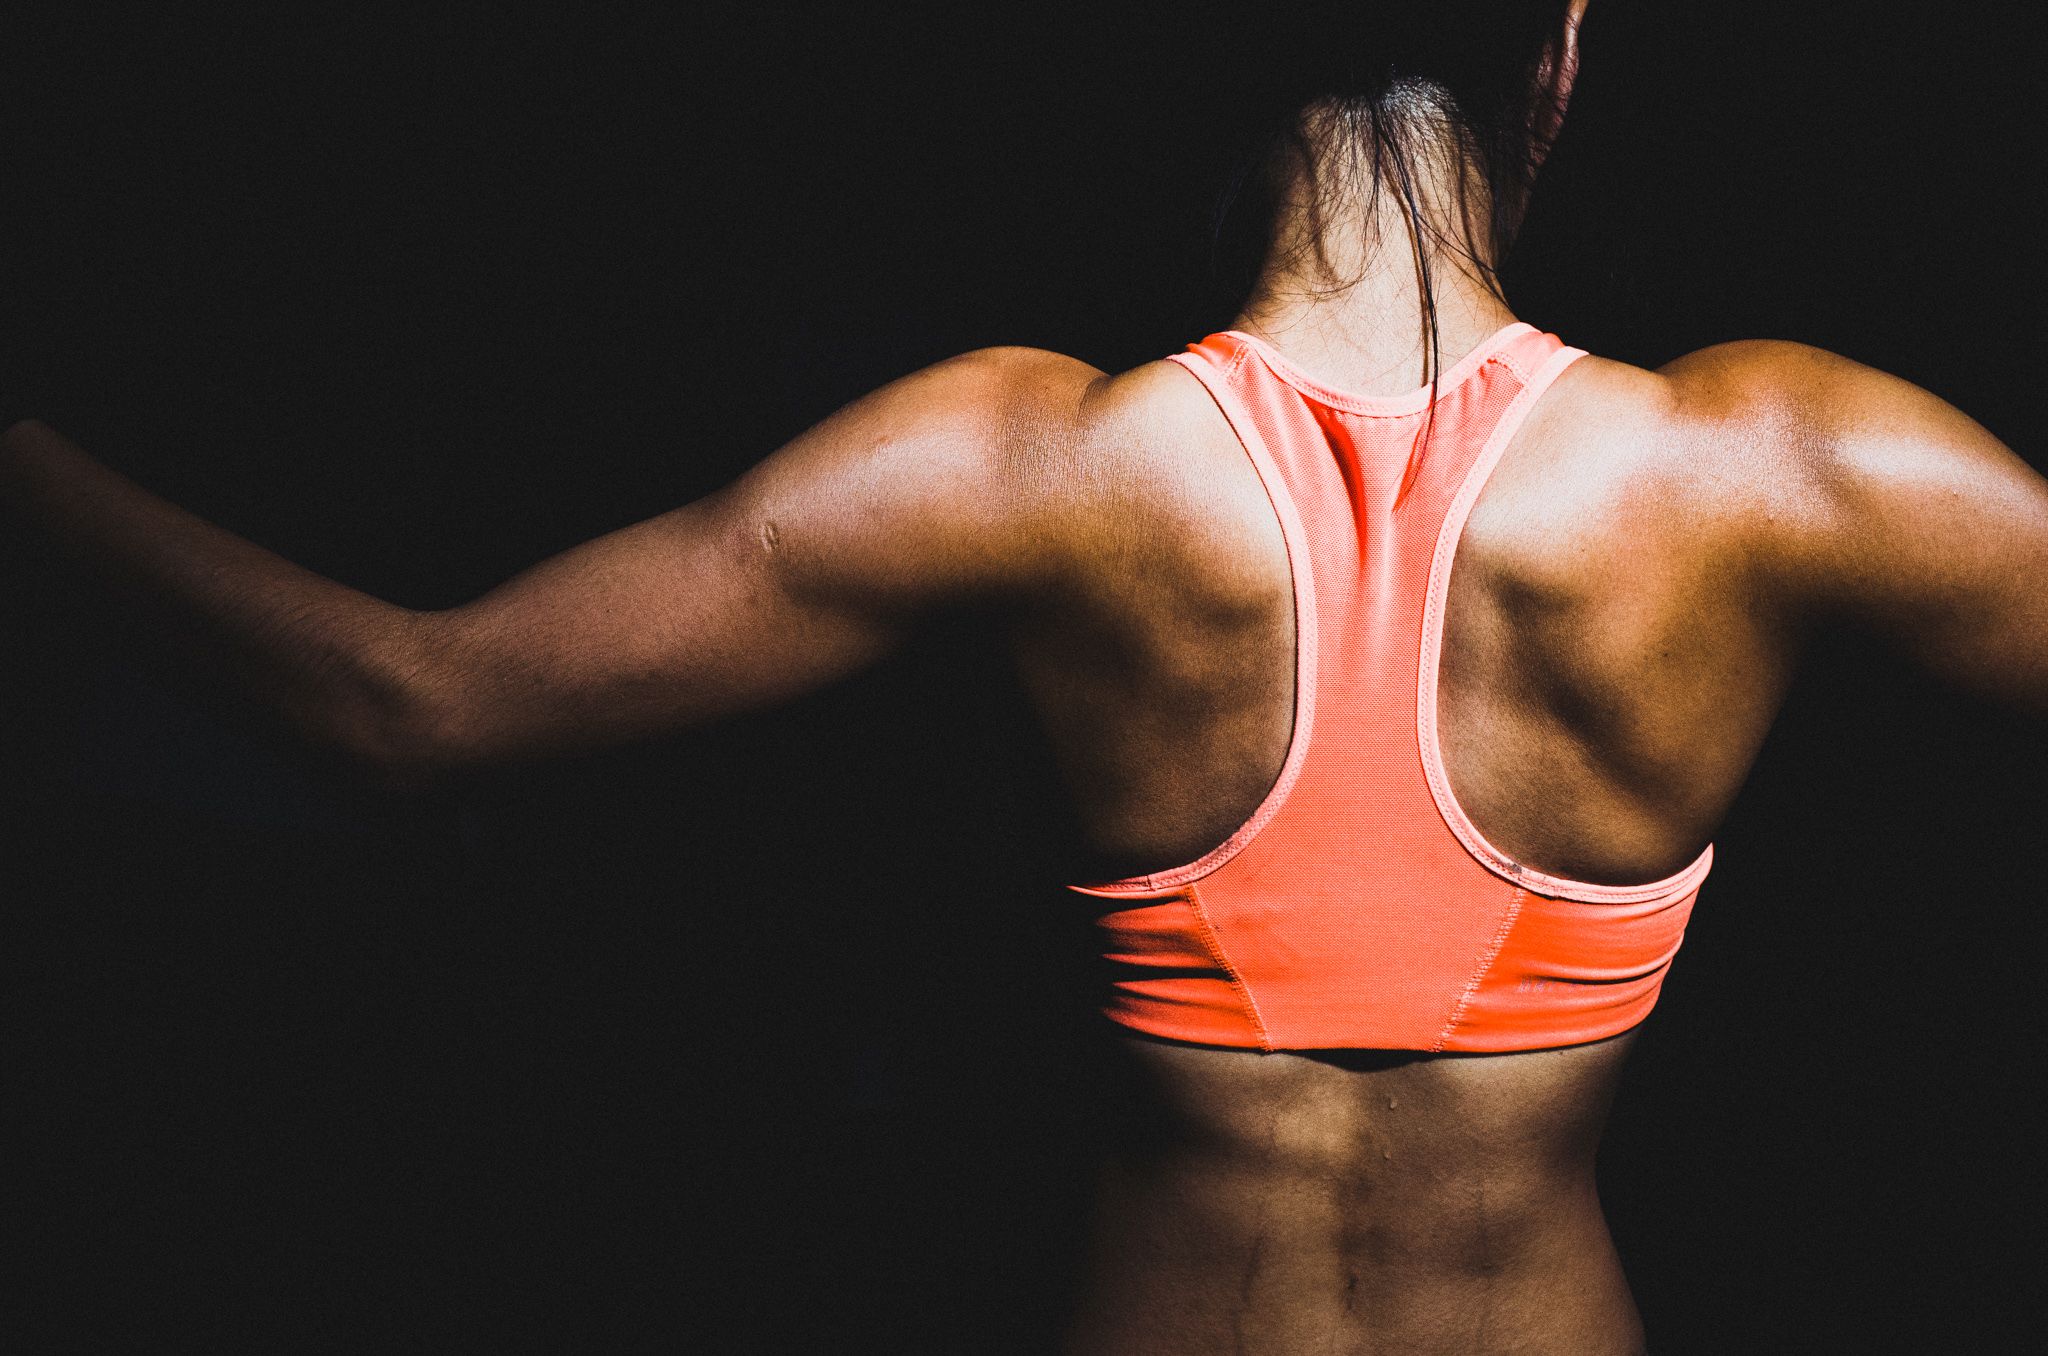 20 Best Back Exercises for Women - The Best Workout to Tone Your Back